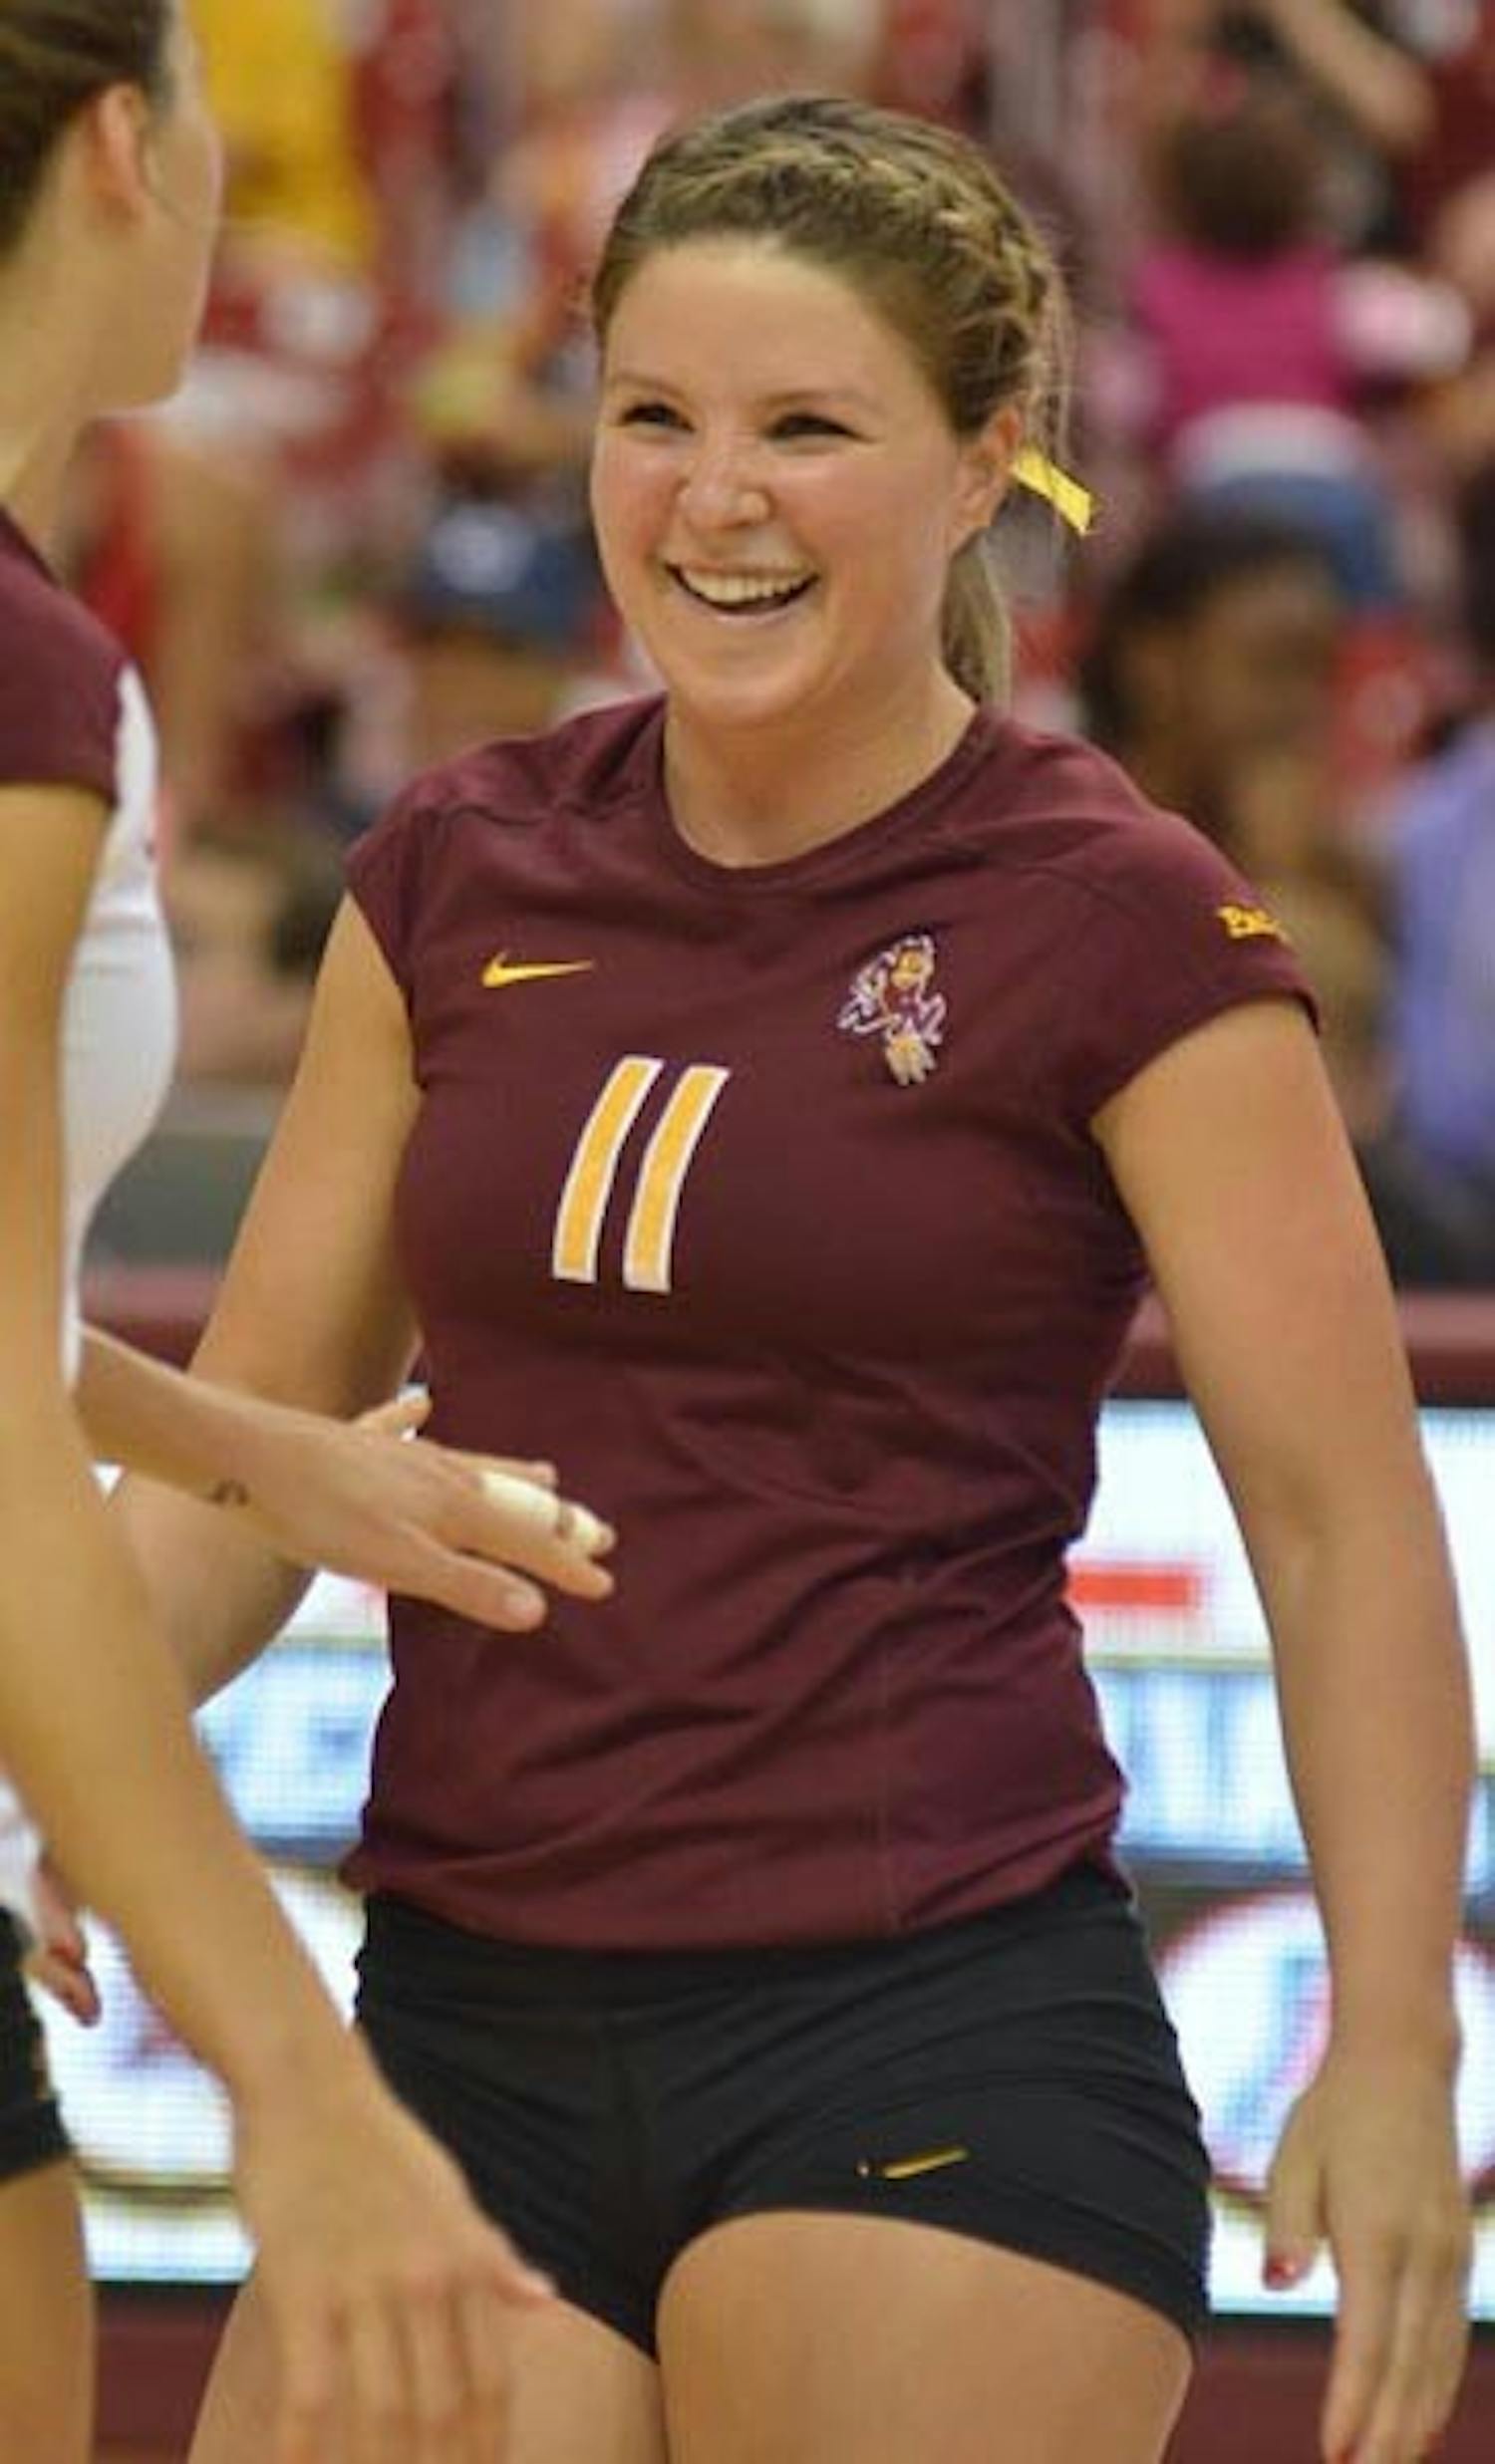 BIG VOCALS: The role of being a leader can be tough to succeed in, but for ASU senior libero Sarah Johnson, her lessons learned along her volleyball journey as a Sun Devil have helped her become the great vocal leader she is today. (Photo by Aaron Lavinsky)